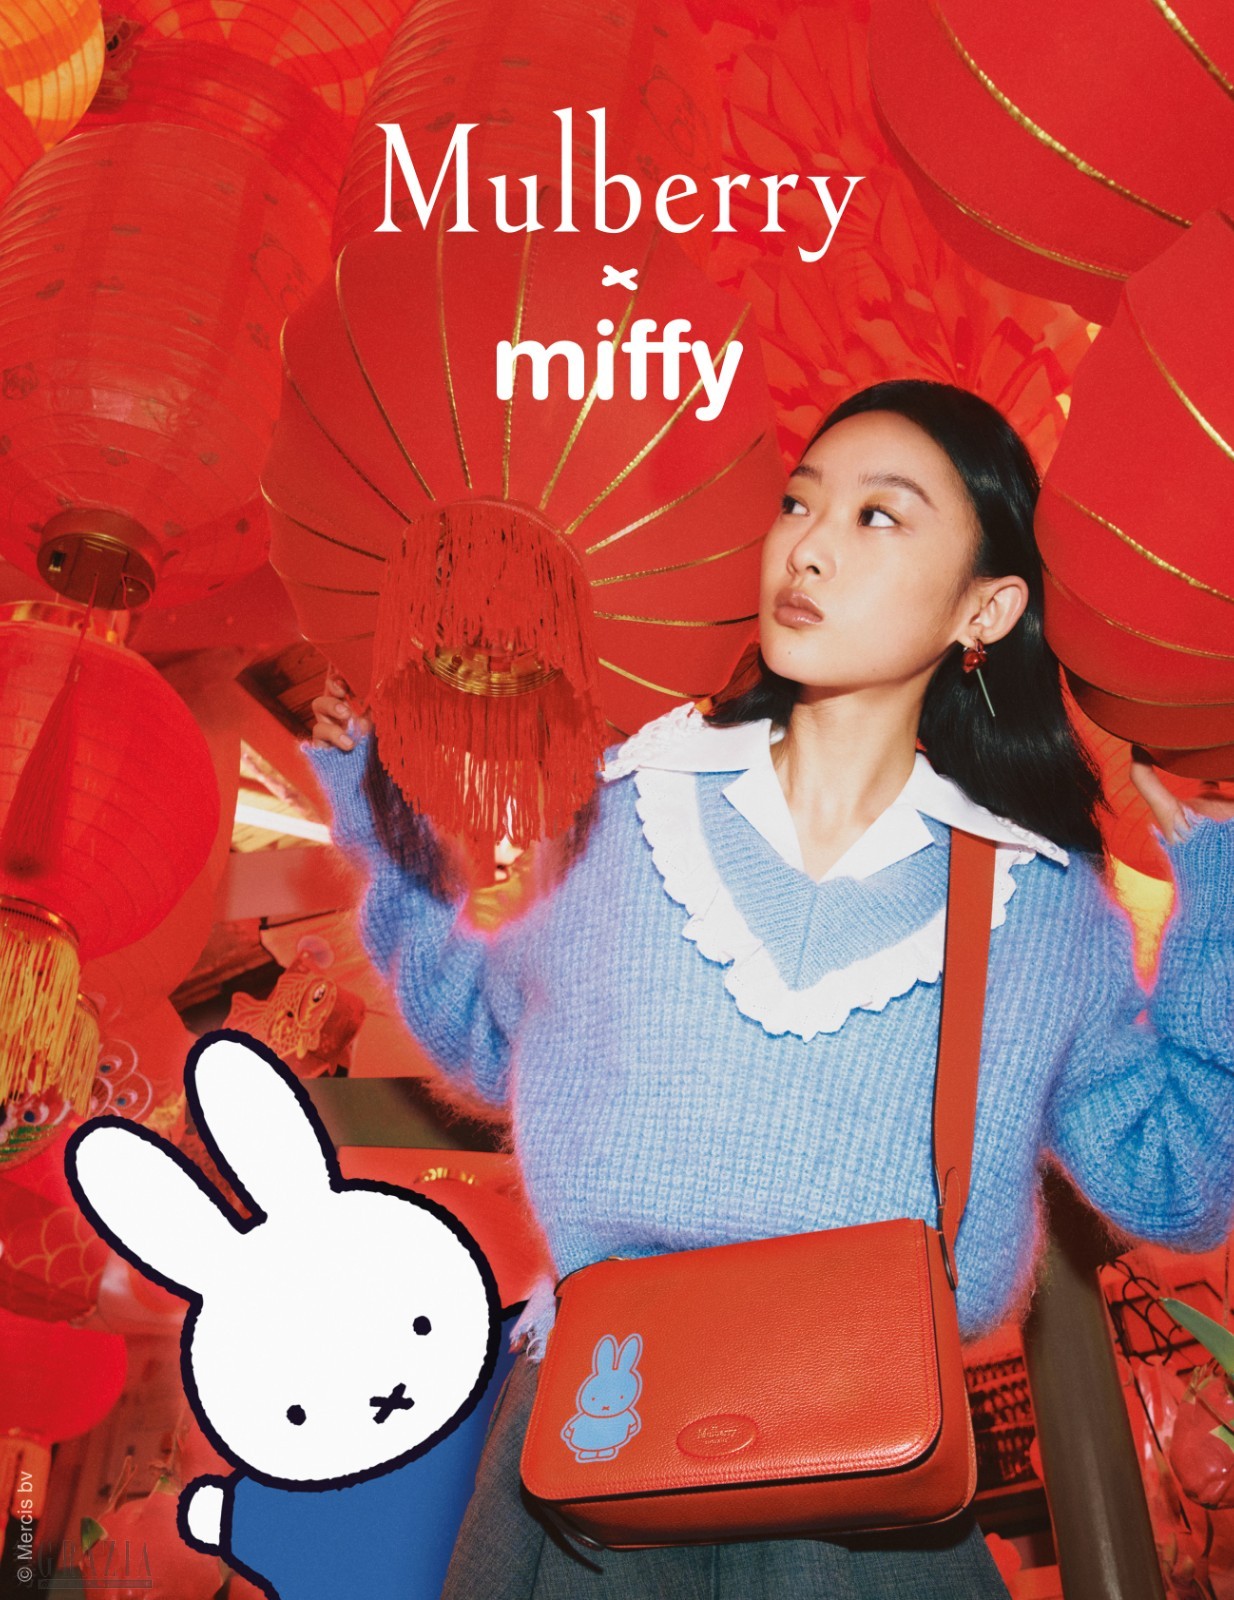 Mulberry_LNY22_Campaign_Crops_With_Logo2.jpg